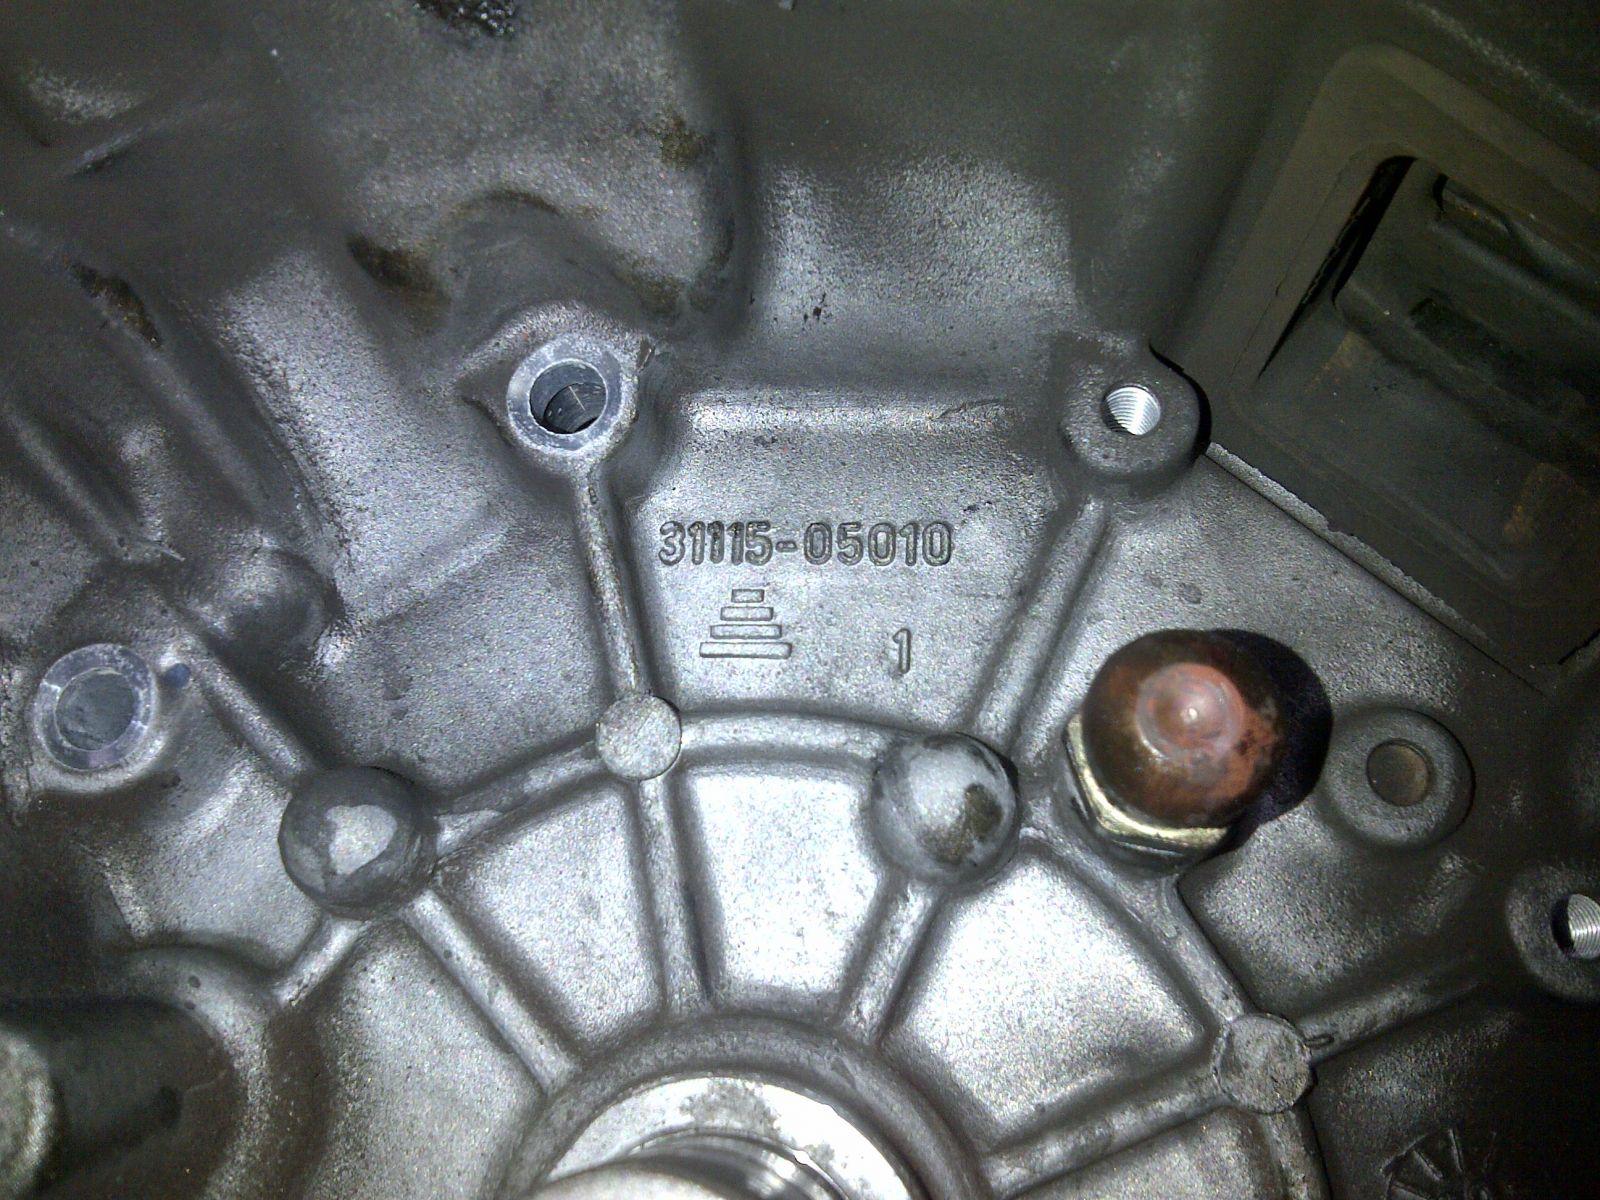 Avensis 53 plate 1.8VVTi gearbox damage T25